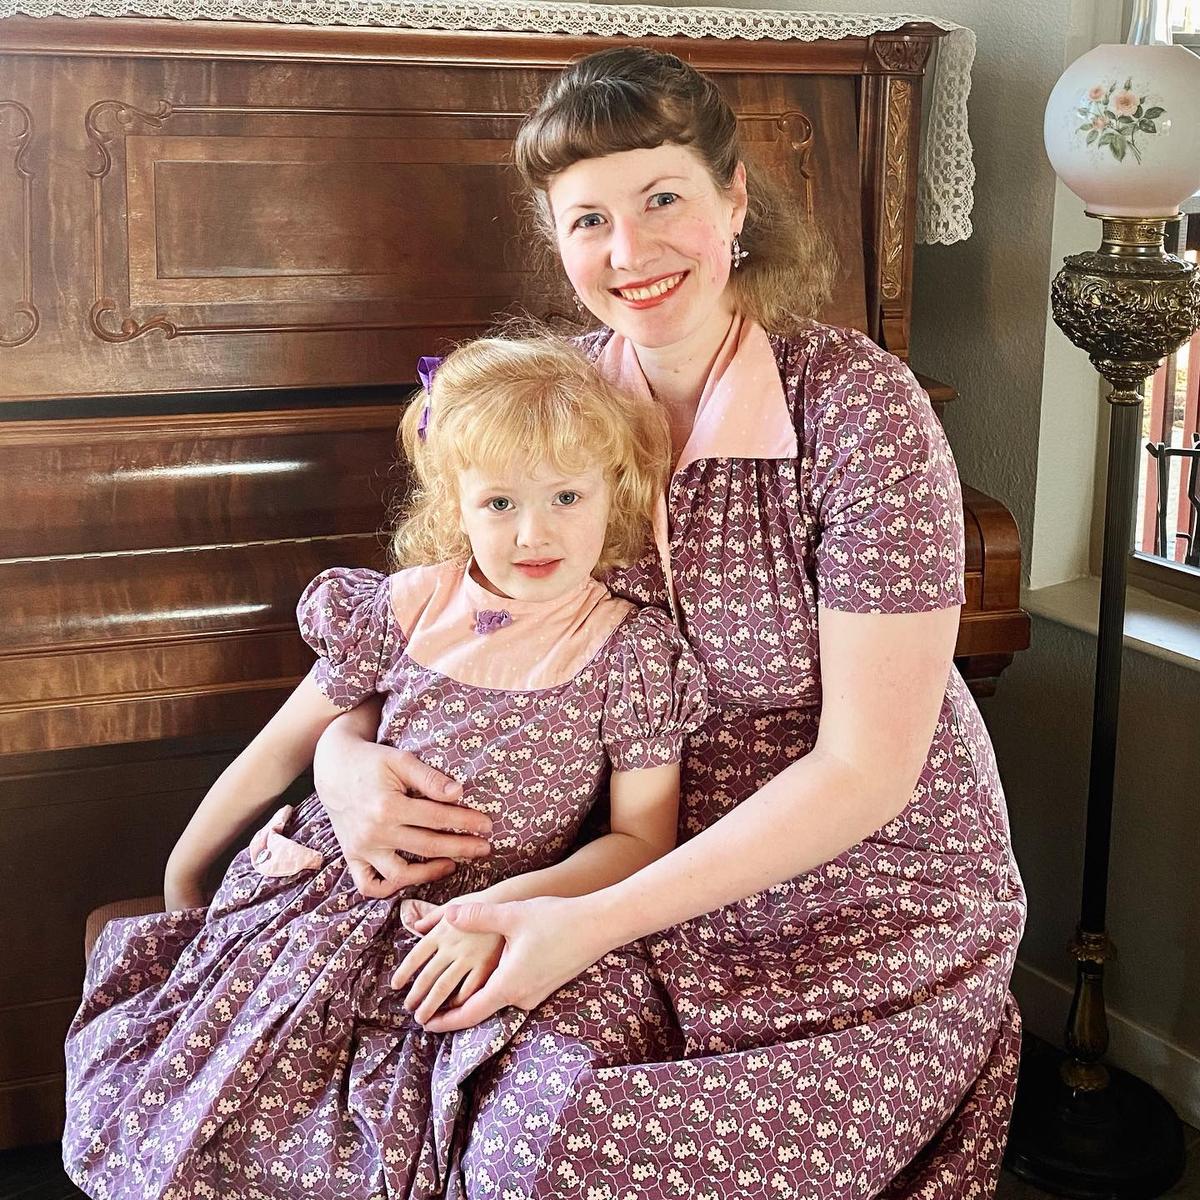 Mrs. Clay says, "As long as the children are peacefully employed, my hands fly." (Courtesy of <a href="https://www.instagram.com/verityvintagestudio/">Kristen Clay</a>)